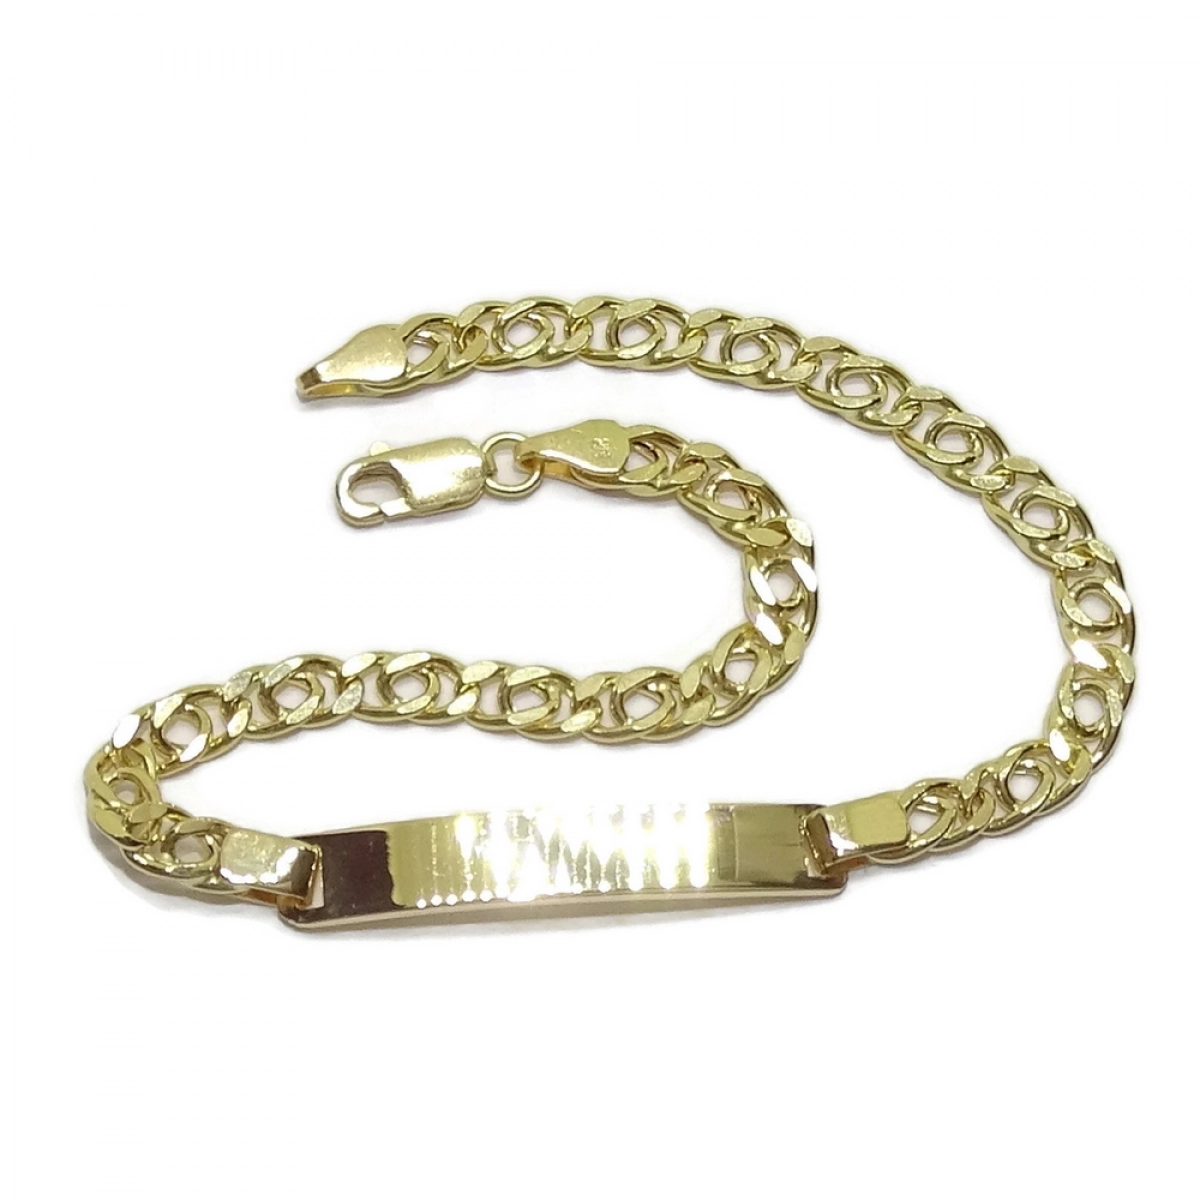 BRACELET FOR NI�OR 18K YELLOW GOLD PLATE 100% CUSTOMIZABLE, NEVER SAY NEVER